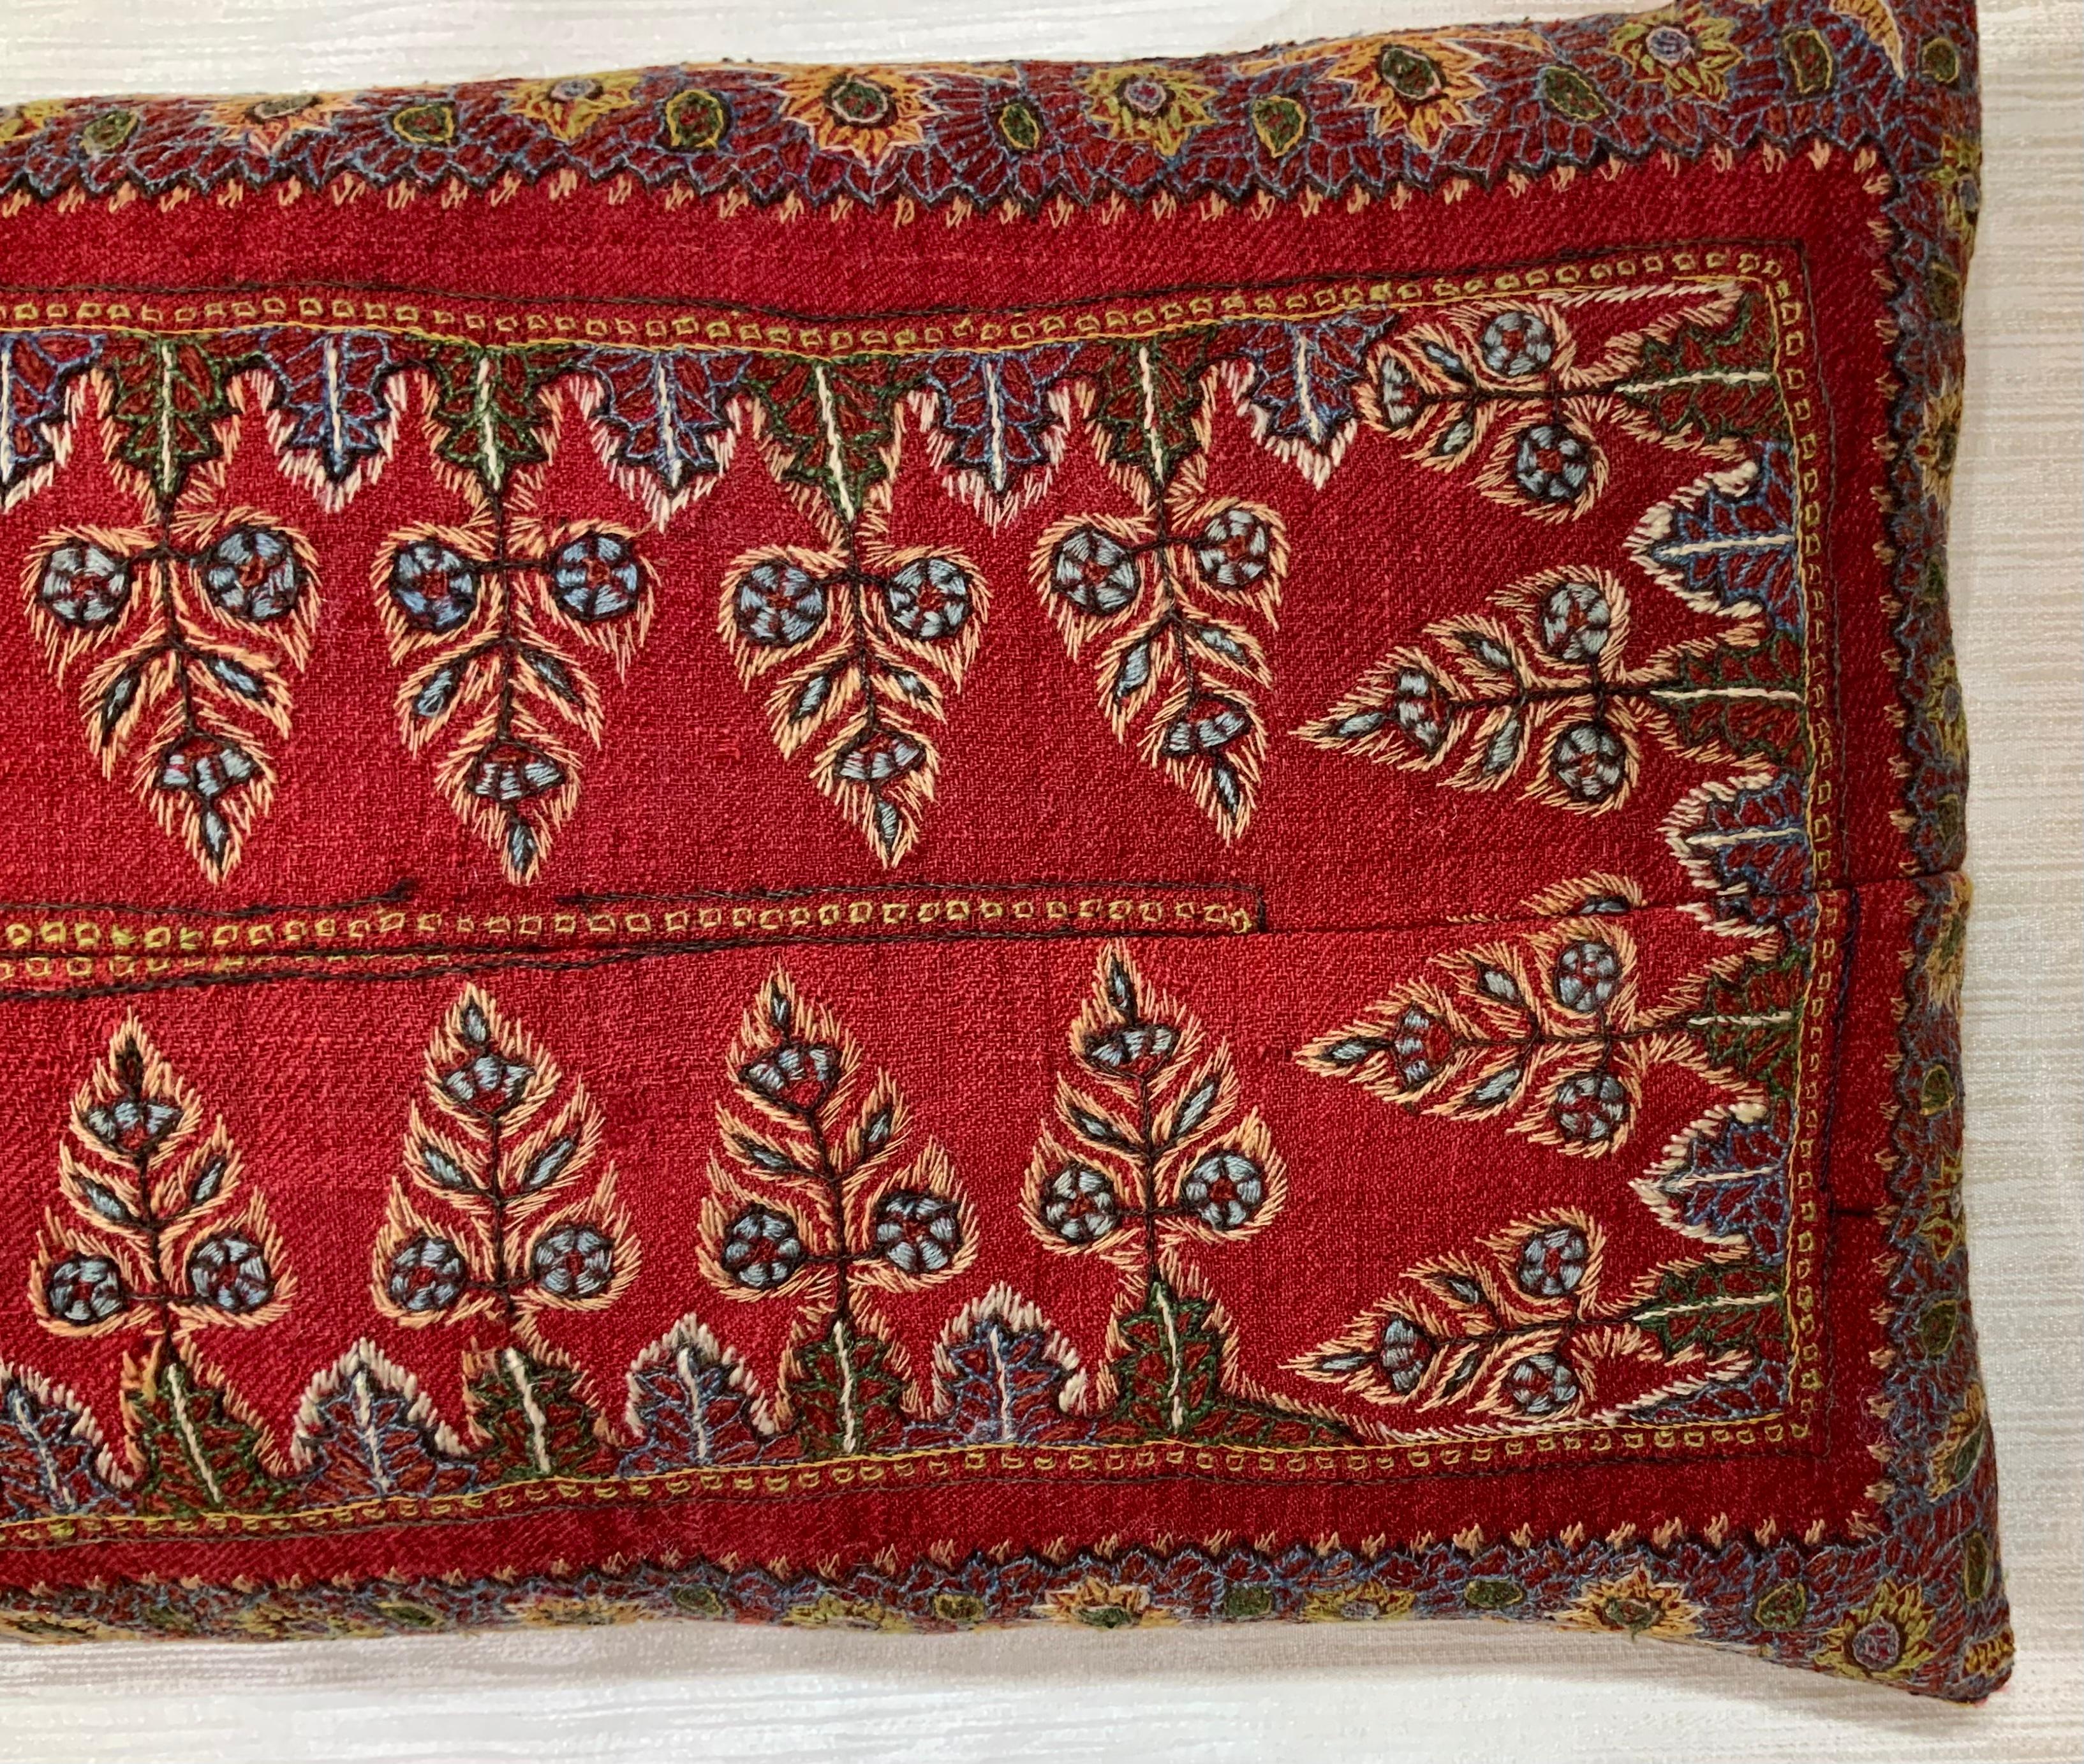 Single Hand Antique Embroidery Suzani Pillow 3